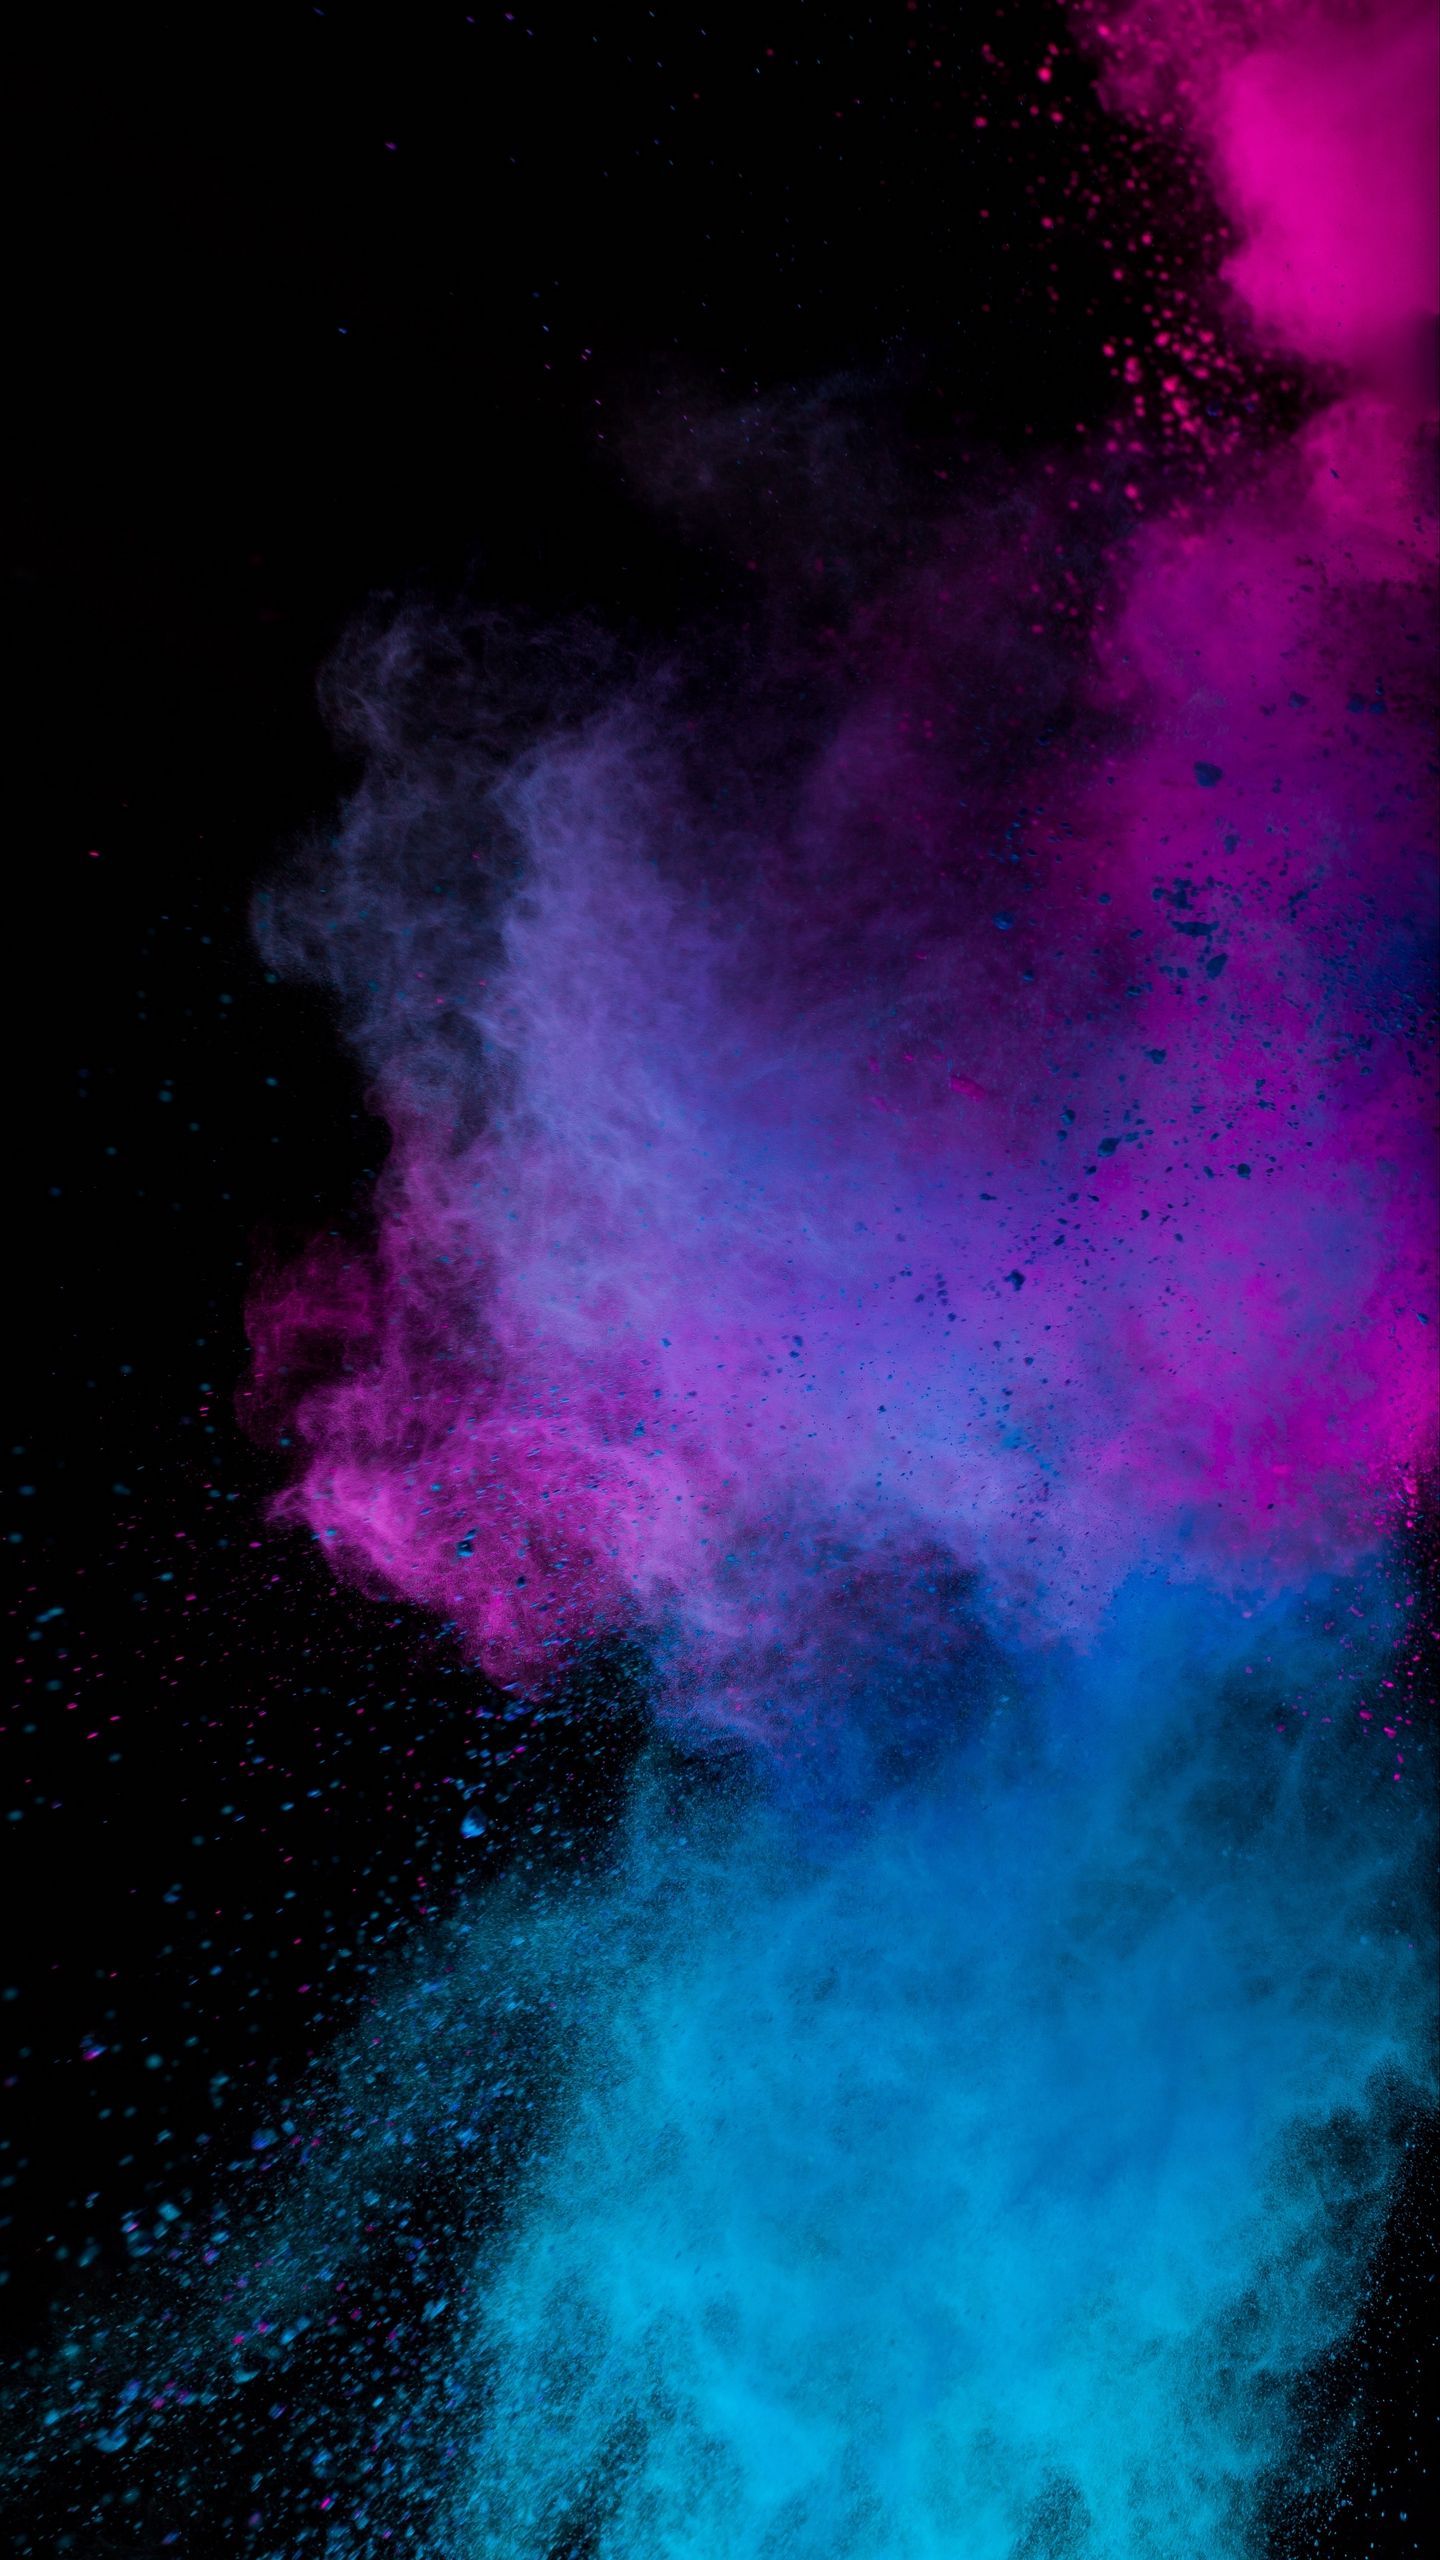 Download wallpaper 1440x2560 paint, holi, multicolored, particles qhd samsung galaxy s s7. Galaxy phone wallpaper, Simple iphone wallpaper, HD wallpaper android